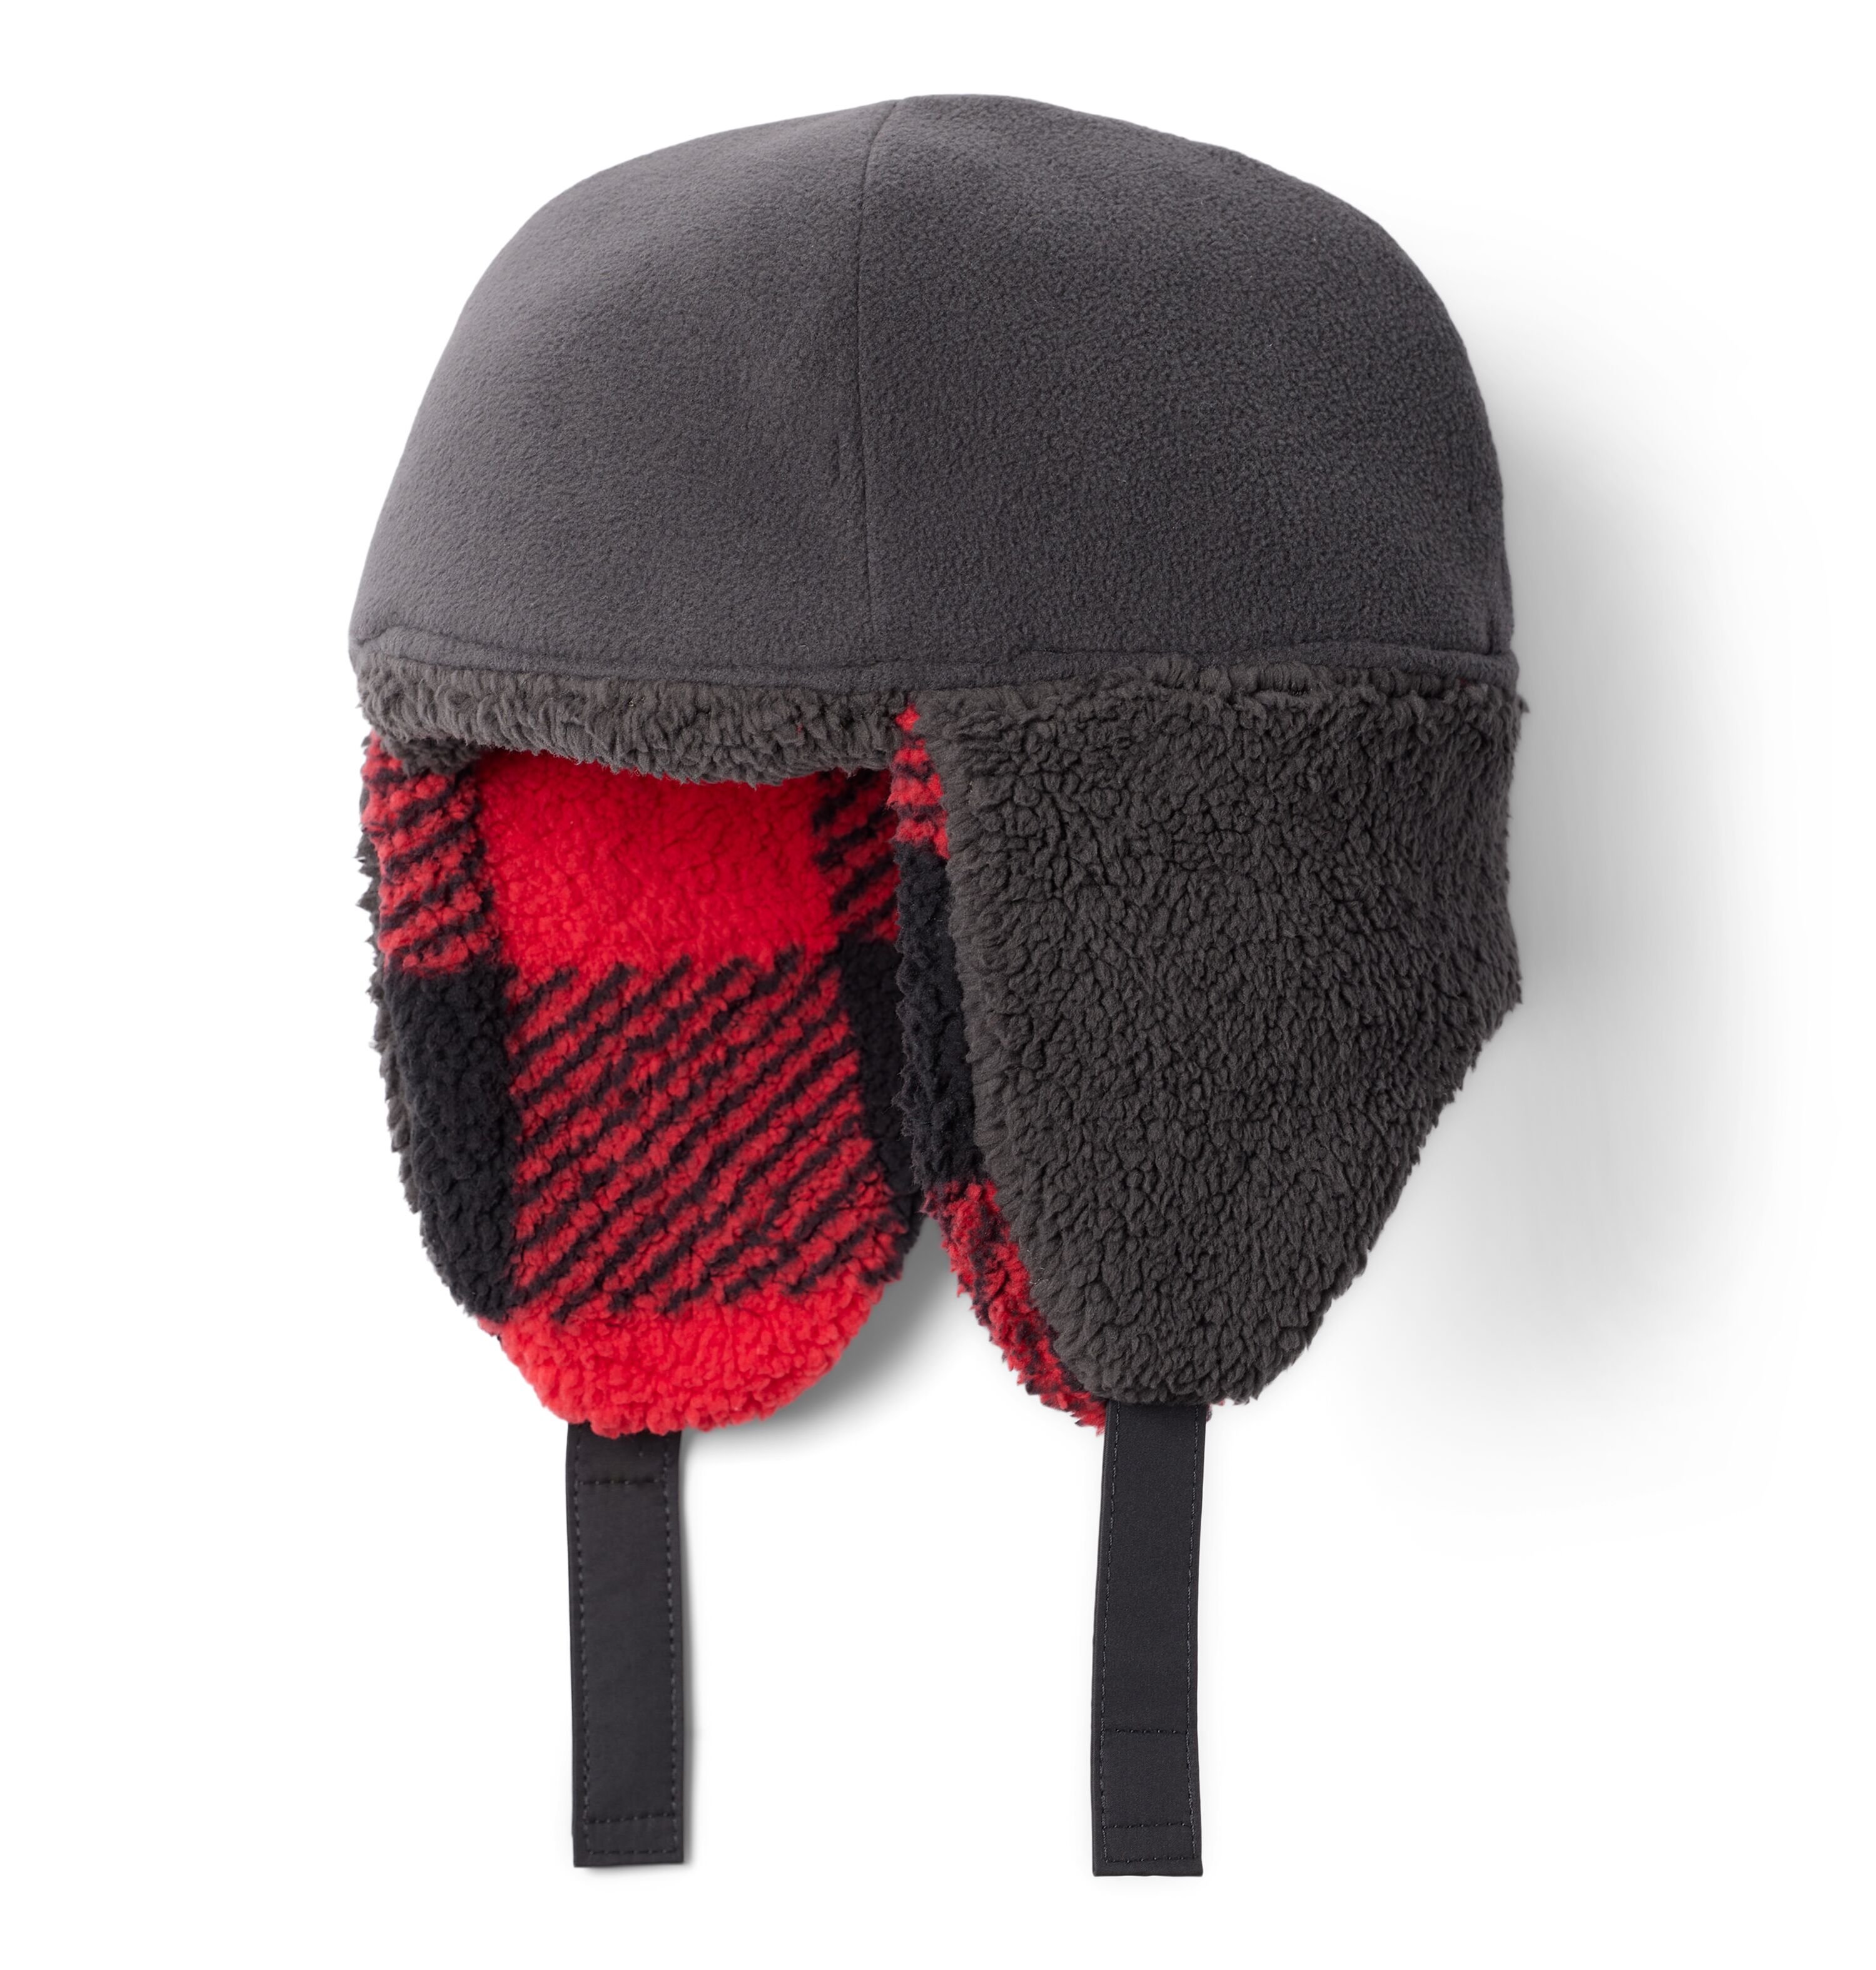 Kids' Rugged Ridge Sherpa Trapper Hat in Red Lily Check